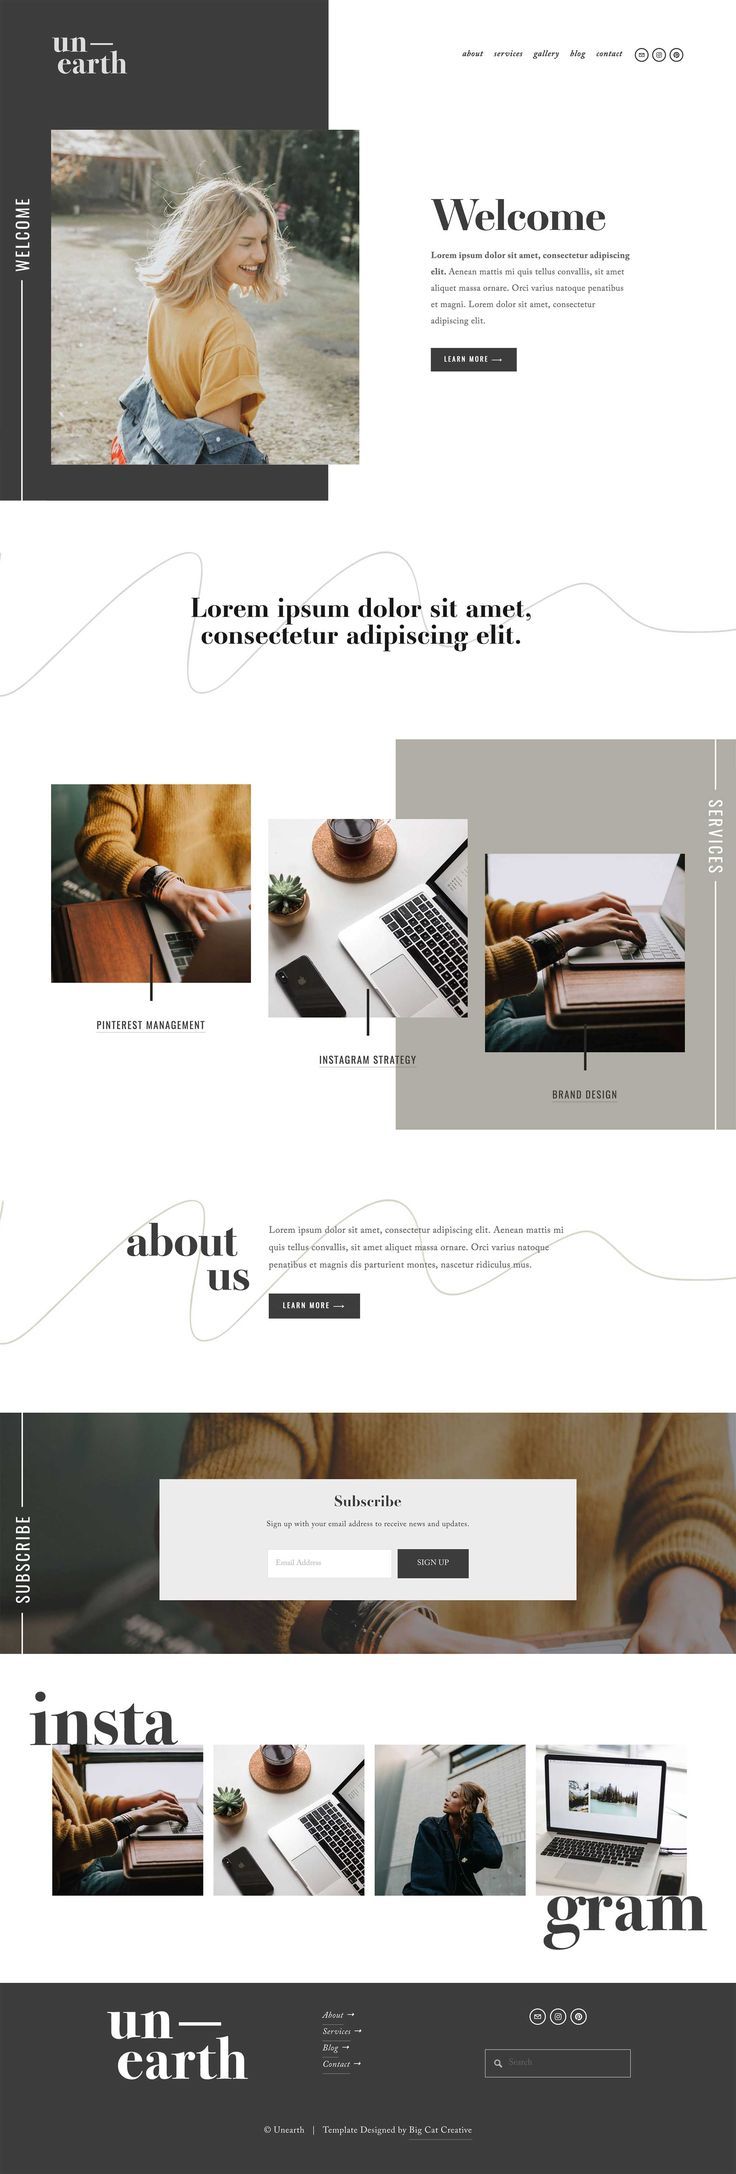 Unearth Squarespace Template Kit